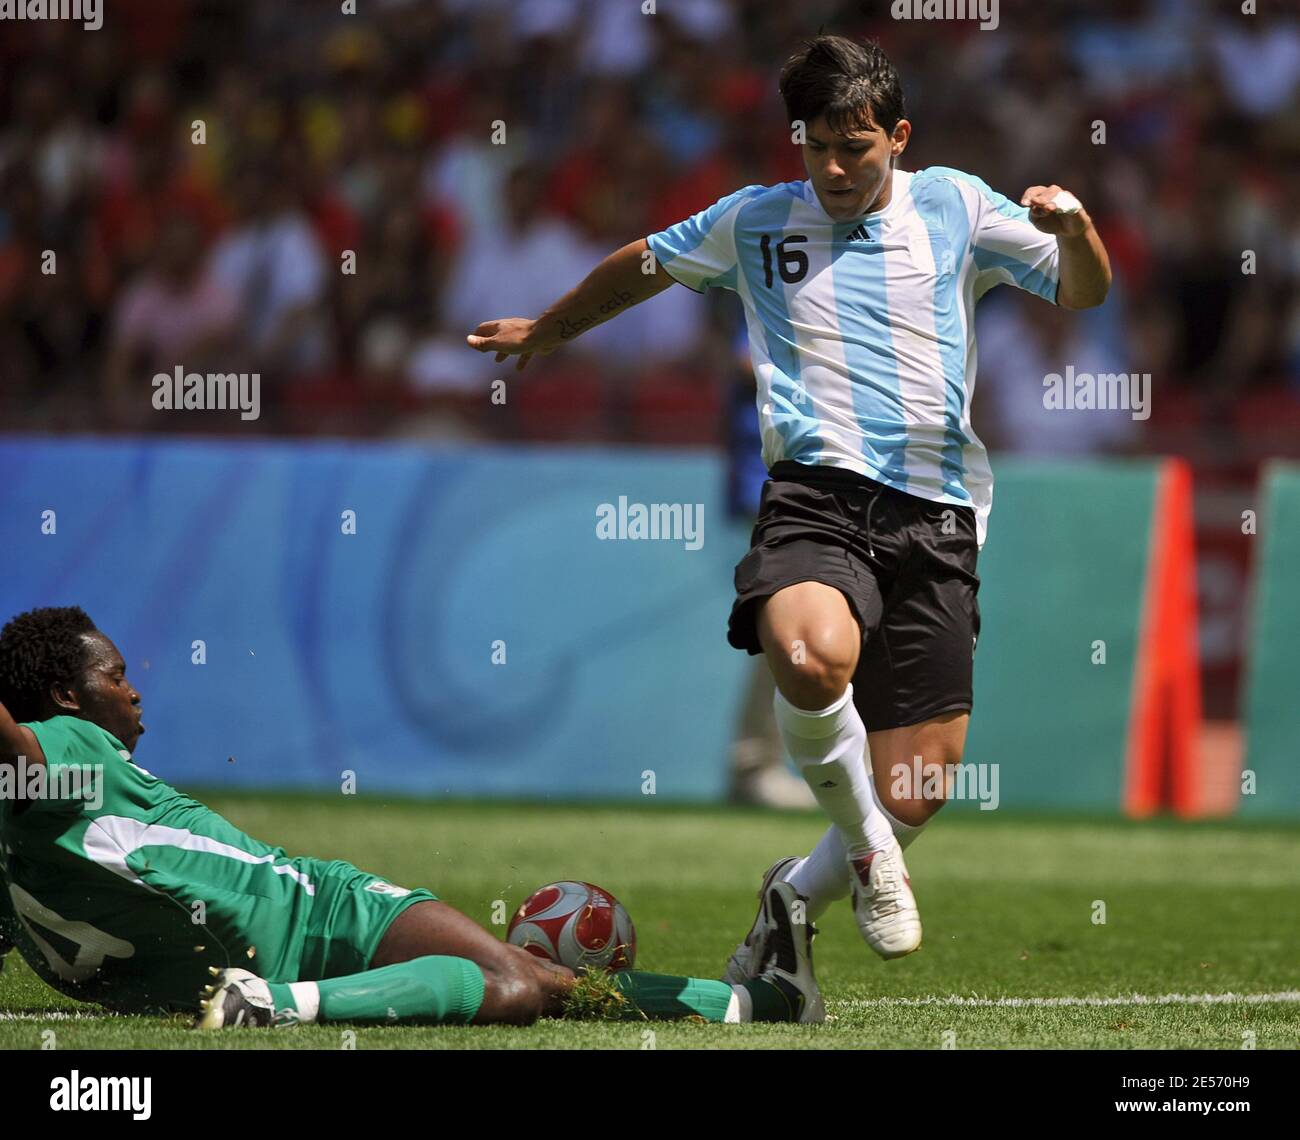 Argentina's Sergio Aguero during the Men's Gold Medal football match between Nigeria and Argentina of Beijing 2008 Olympic Games on Day 15 at the National Stadium in Beijing, China on August 23, 2008. Argentina won 1-0. Photo by Gouhier-Hahn/Cameeon/ABACAPRESS.COM Stock Photo